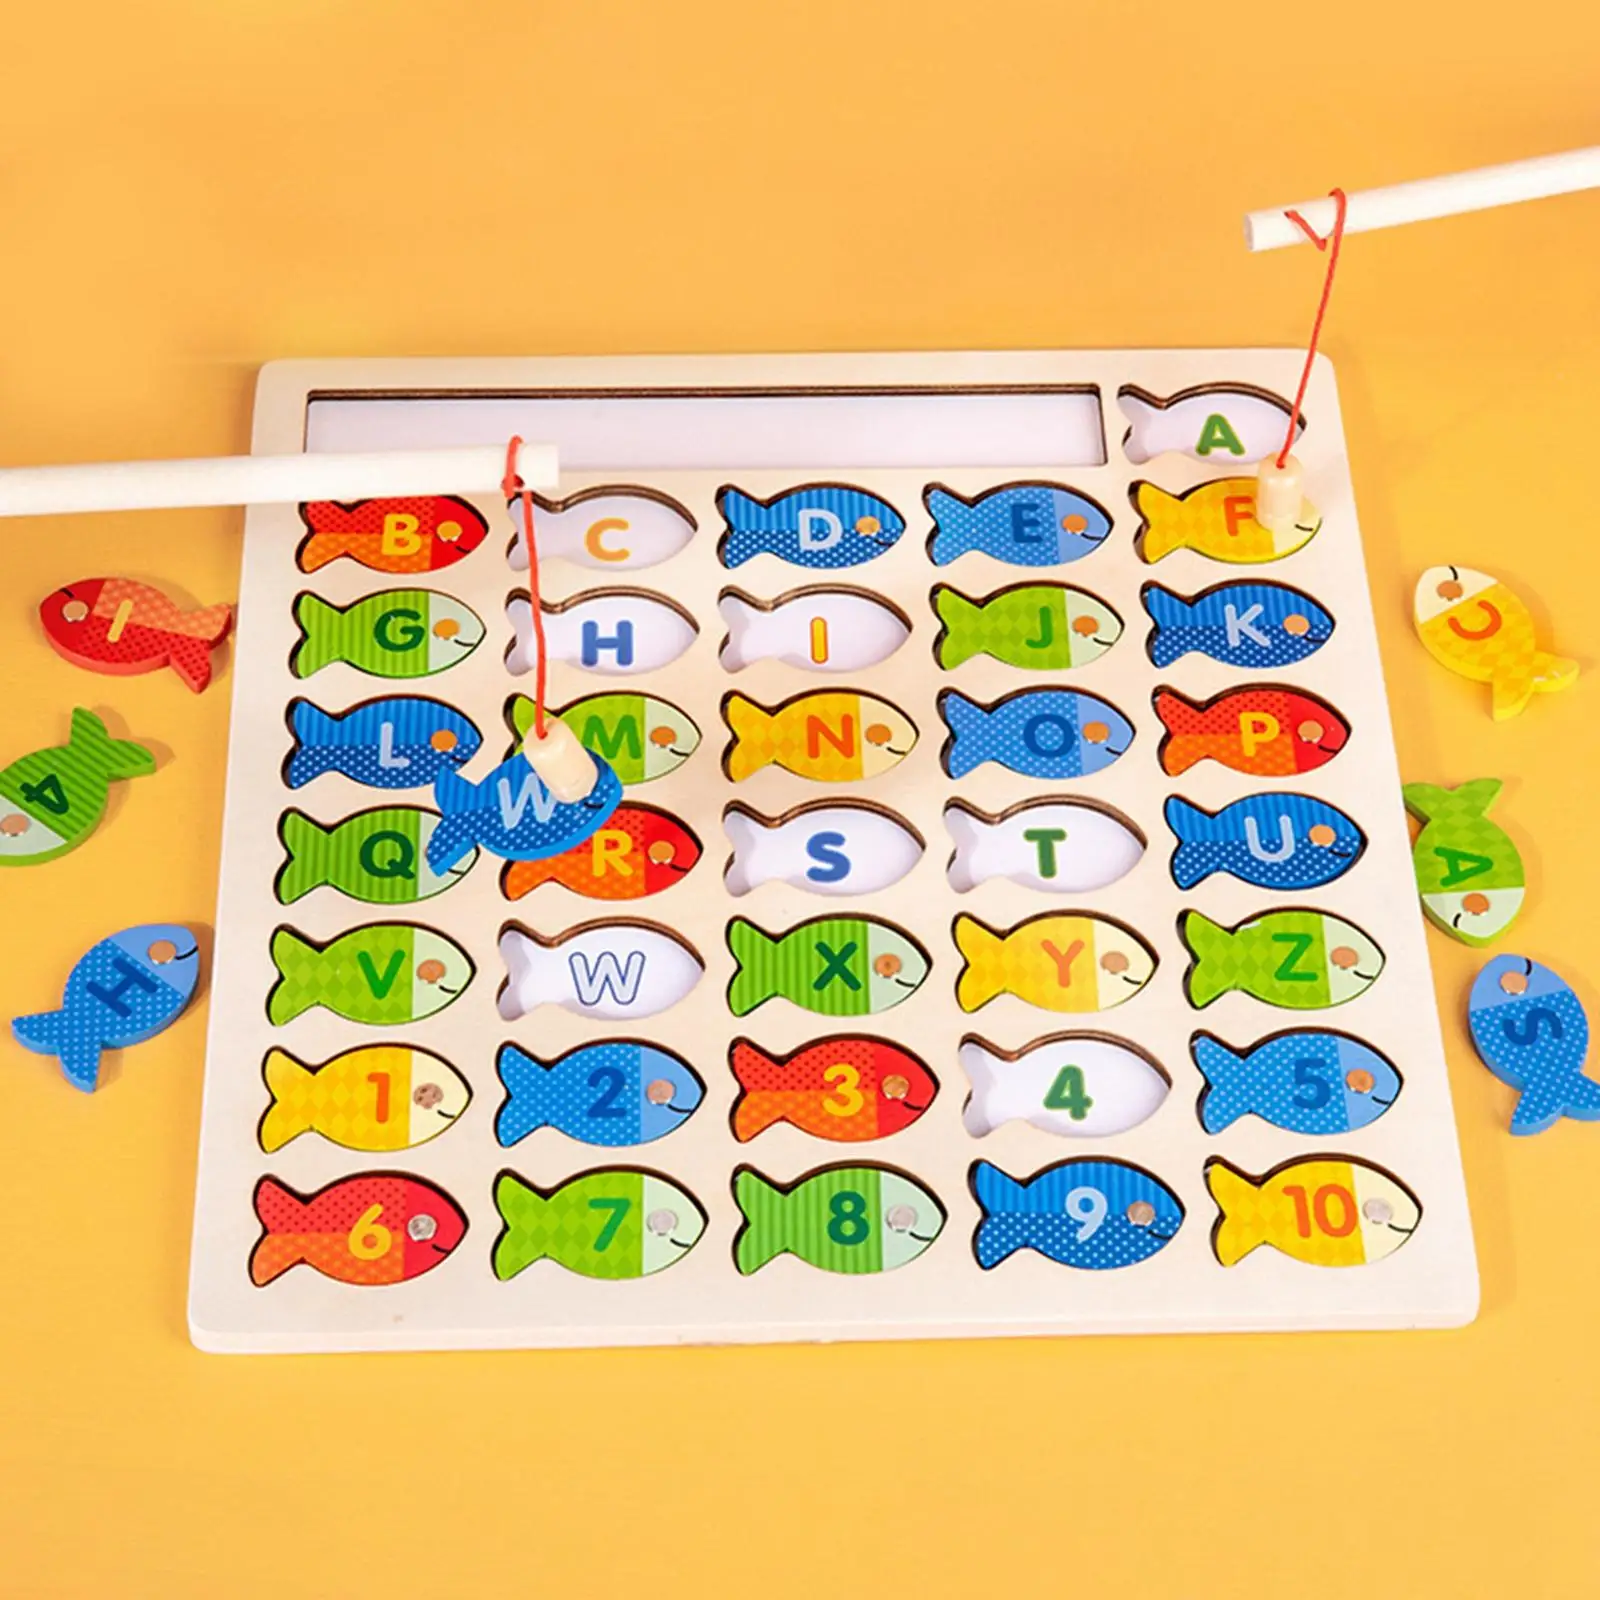 Fishing Game Play Set Developmental Toys Early Educational for Toddler